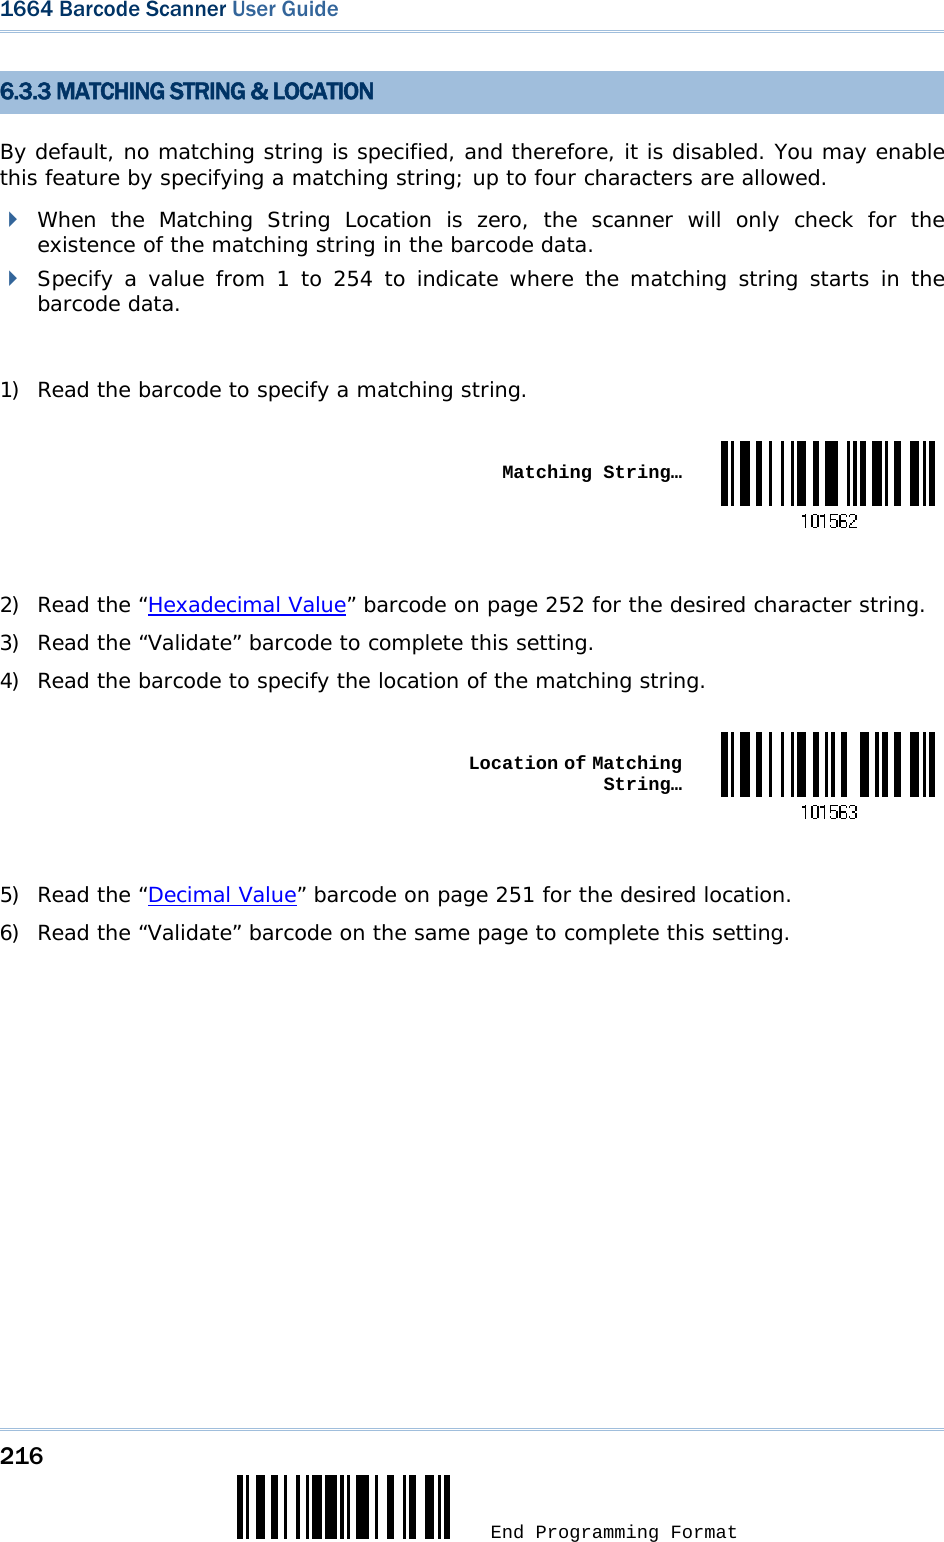 216  End Programming Format 1664 Barcode Scanner User Guide  6.3.3 MATCHING STRING &amp; LOCATION By default, no matching string is specified, and therefore, it is disabled. You may enable this feature by specifying a matching string; up to four characters are allowed.  When the Matching String Location is zero, the scanner will only check for the existence of the matching string in the barcode data.  Specify a value from 1 to 254 to indicate where the matching string starts in the barcode data.  1) Read the barcode to specify a matching string.   Matching String… 2) Read the “Hexadecimal Value” barcode on page 252 for the desired character string.  3) Read the “Validate” barcode to complete this setting. 4) Read the barcode to specify the location of the matching string.   Location of Matching String… 5) Read the “Decimal Value” barcode on page 251 for the desired location.  6) Read the “Validate” barcode on the same page to complete this setting.    